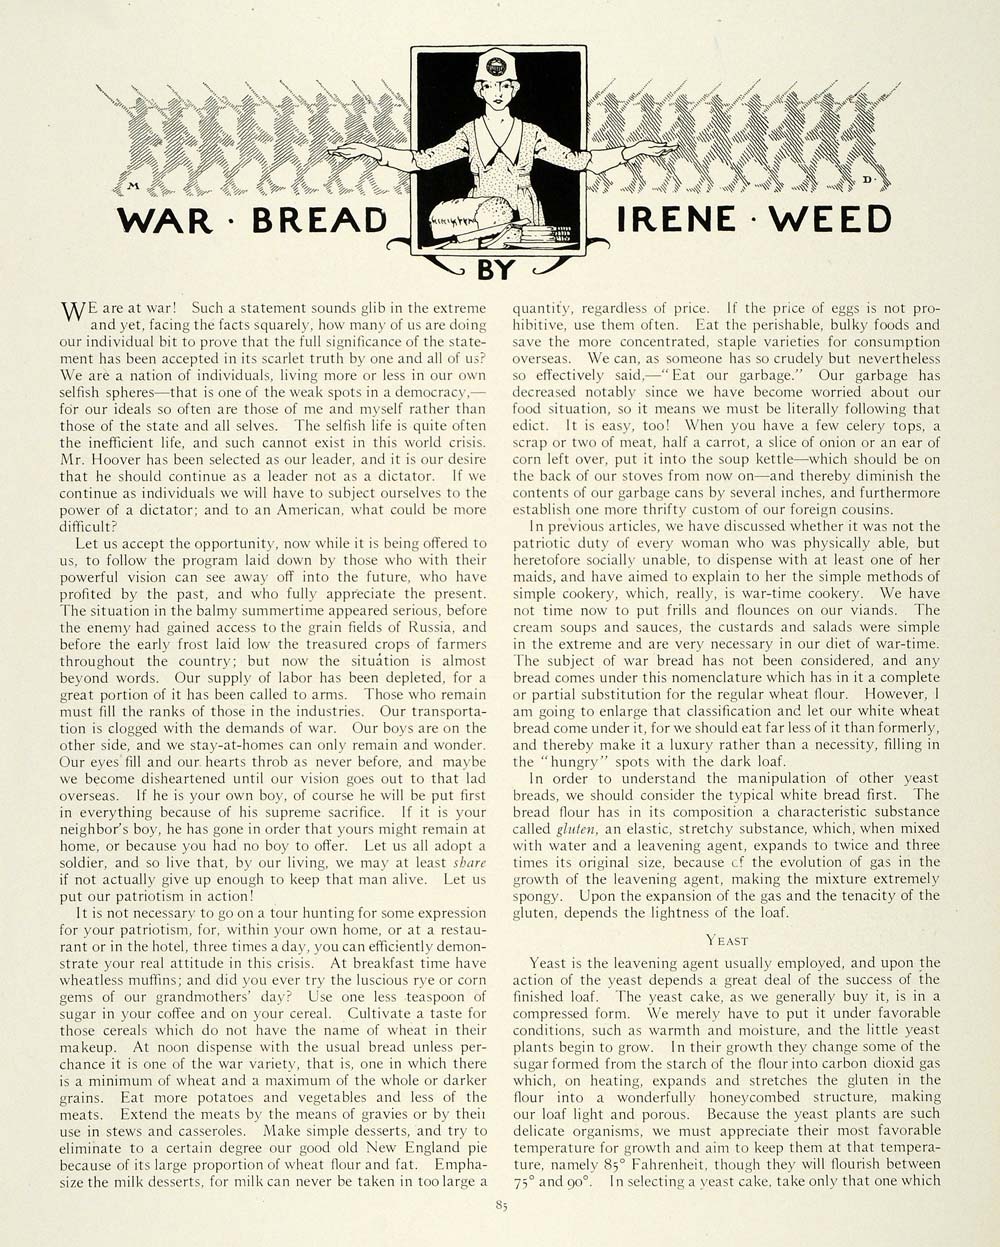 1918 Article WWI Wartime Food Rationing Irene Weed - ORIGINAL THB1